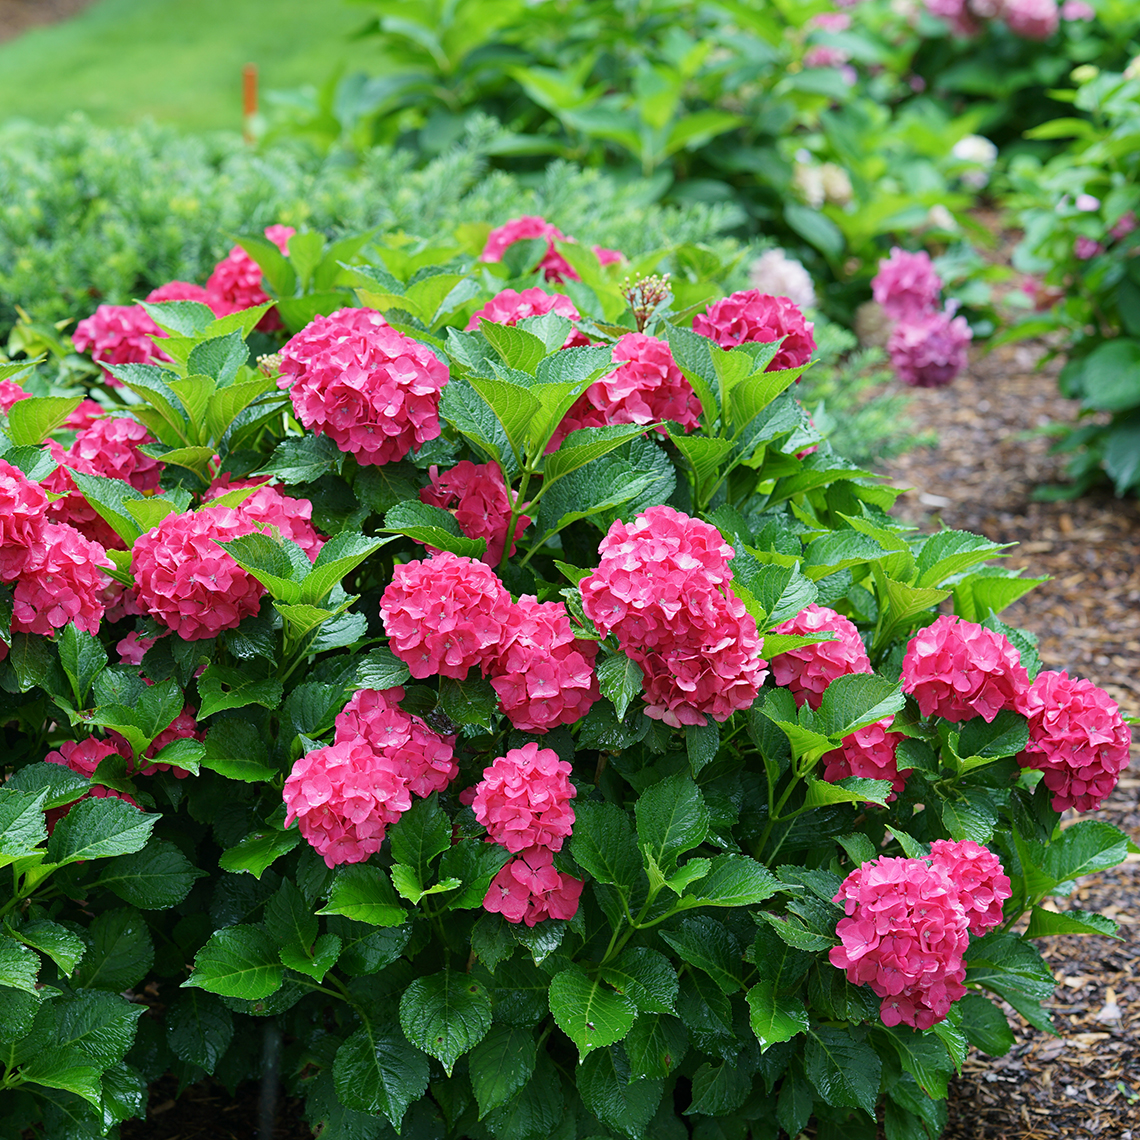 Dwarf Cityline Paris hydrangea blooming in a landscape covered in red flowers